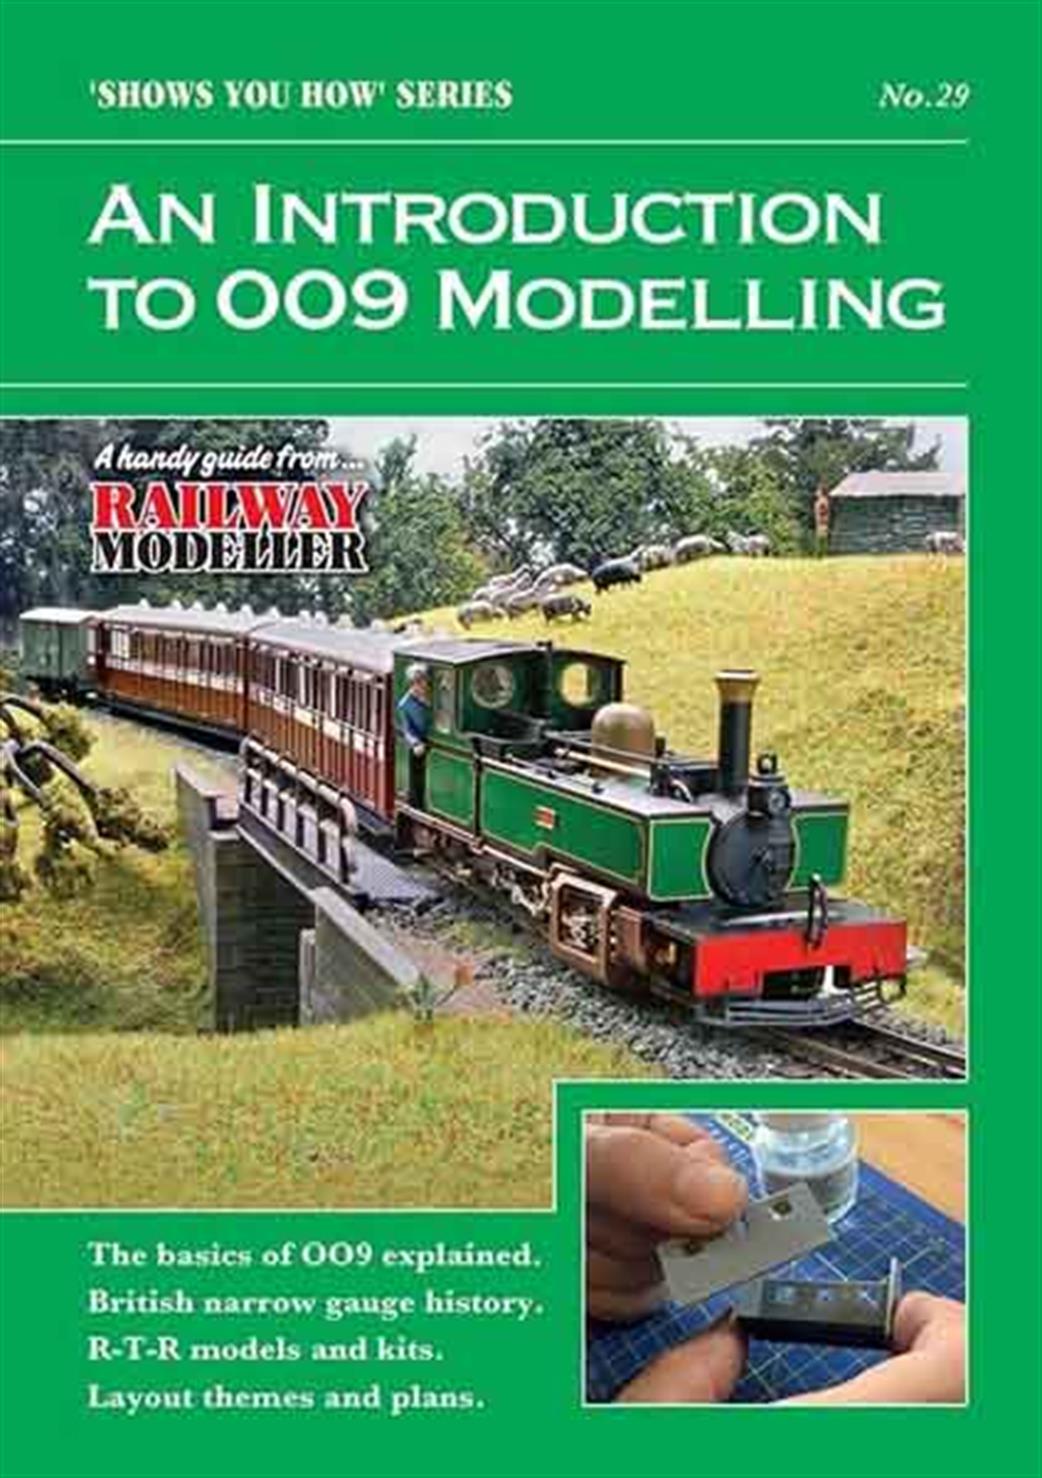 Peco OO9 SYH 29 Introduction to OO9 Modelling Peco Shows You How Booklet 29